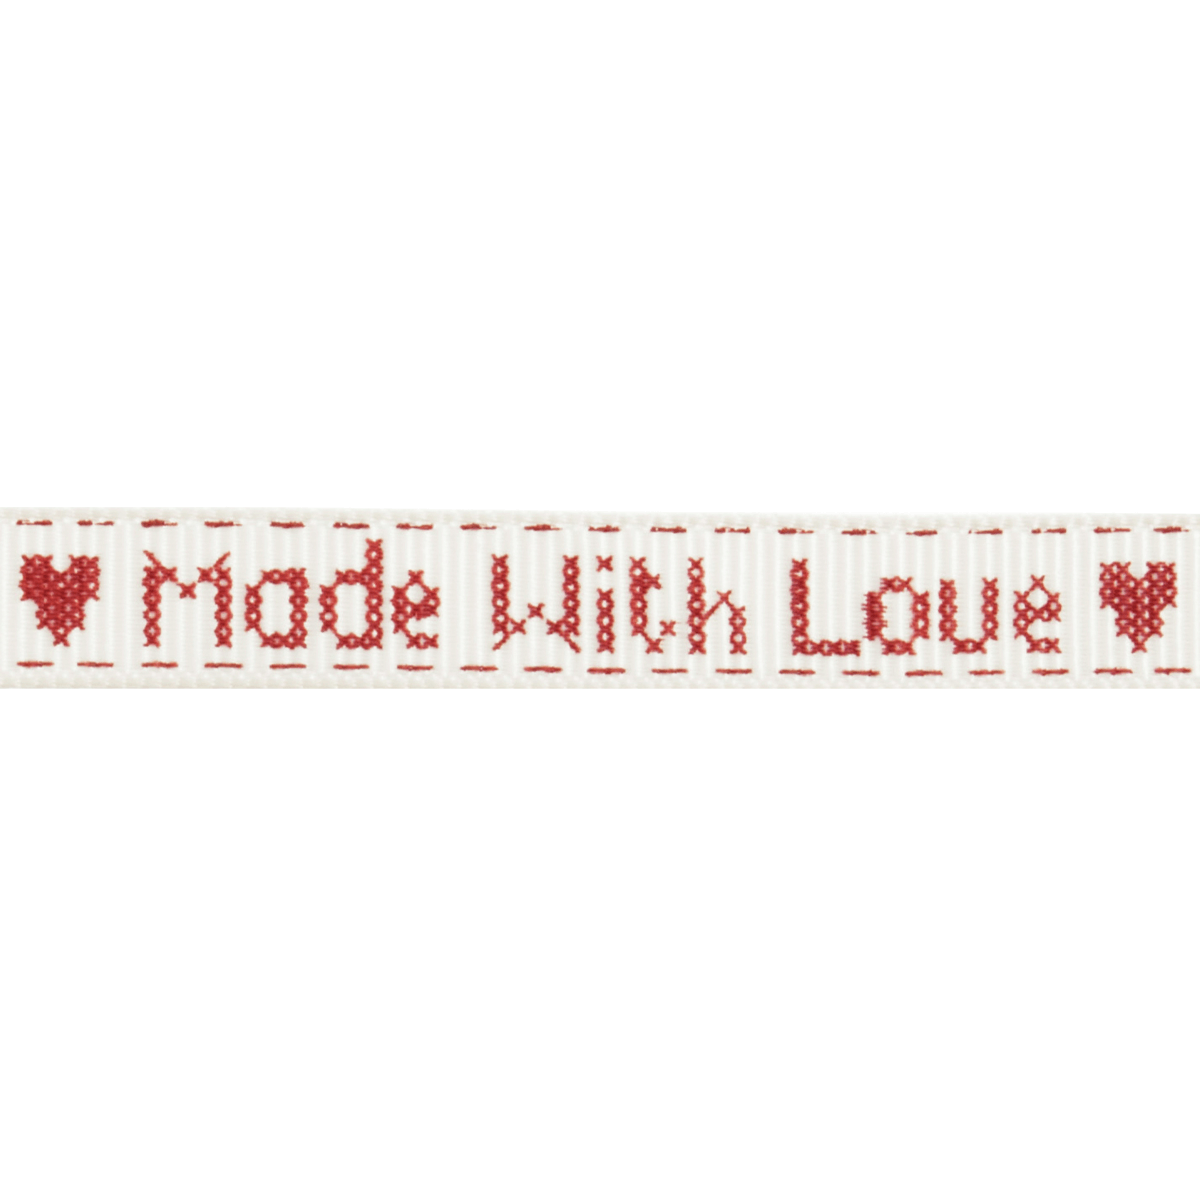 Bowtique Grosgrain Made With Love Stitch Hearts Ribbon 5mm x 5m Reel